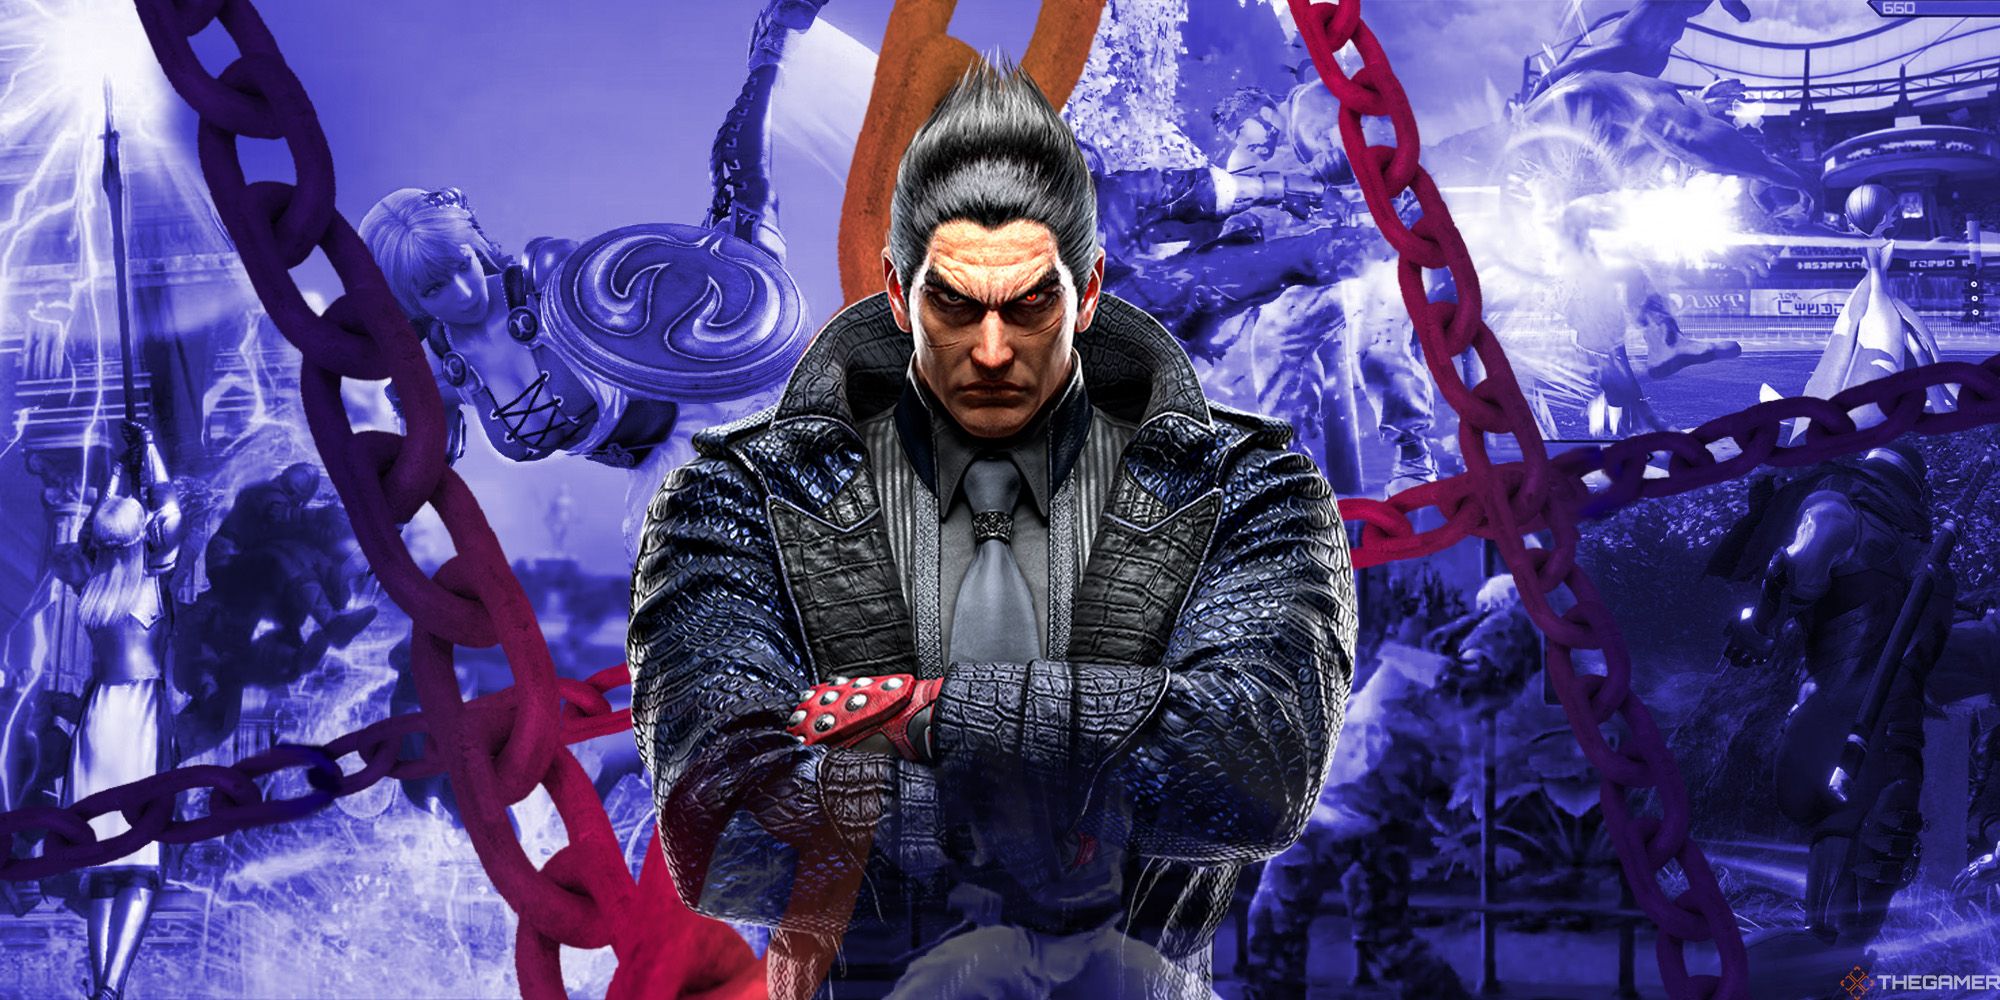 Kazuya Mishima stands against a collage of fighting games that are trapped behind chains.